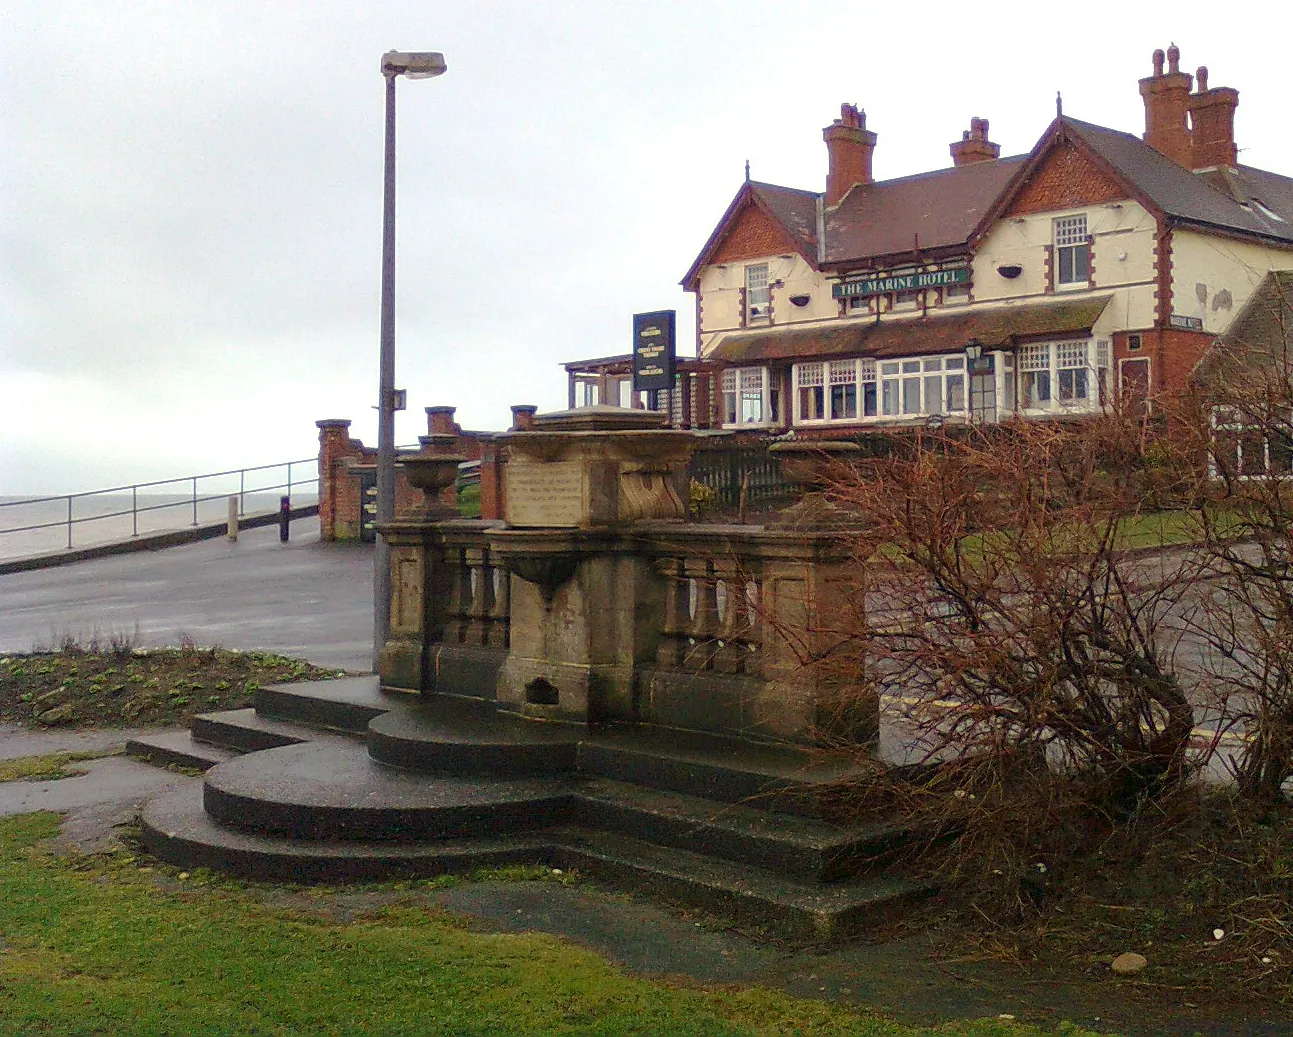 Photo showing: Hornsea Sea Wall and Promenade, Hornsea, East Riding of Yorkshire, England. Commemorating the opening of the Sea Wall and Promenade on 6th July 1907. The Marine Hotel is beyond.